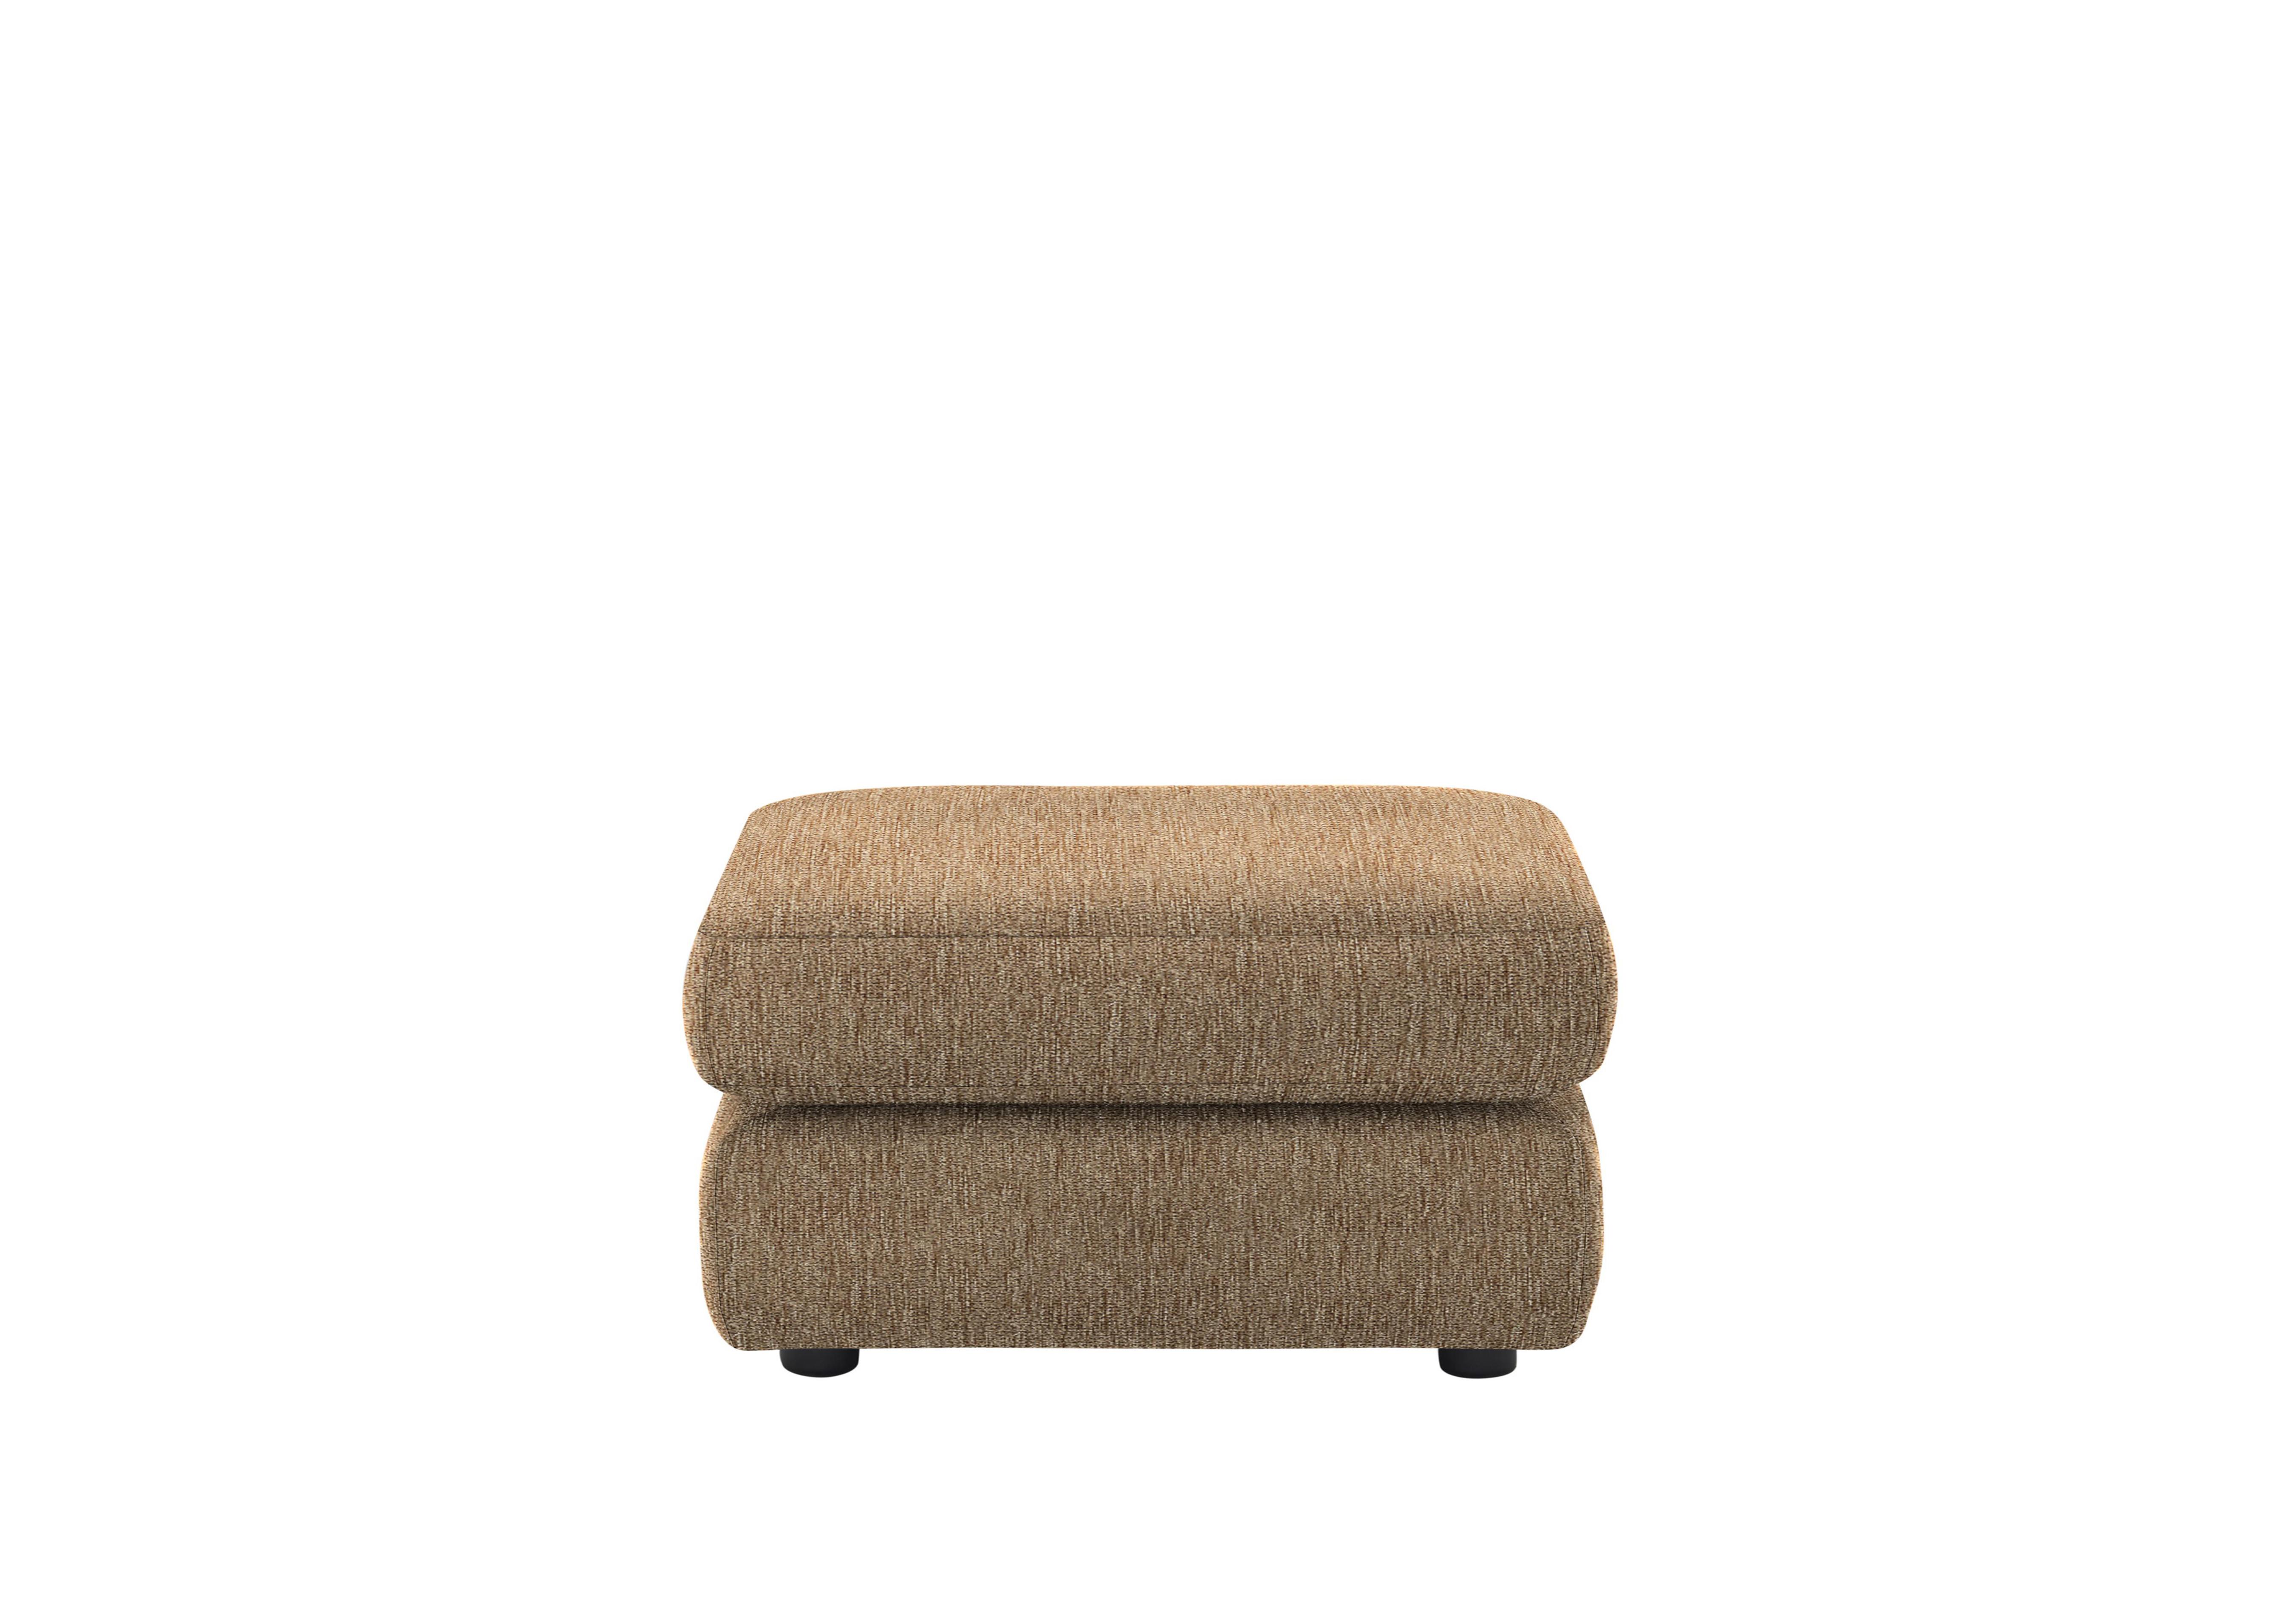 Avon Fabric Storage Footstool in A070 Boucle Cocoa on Furniture Village